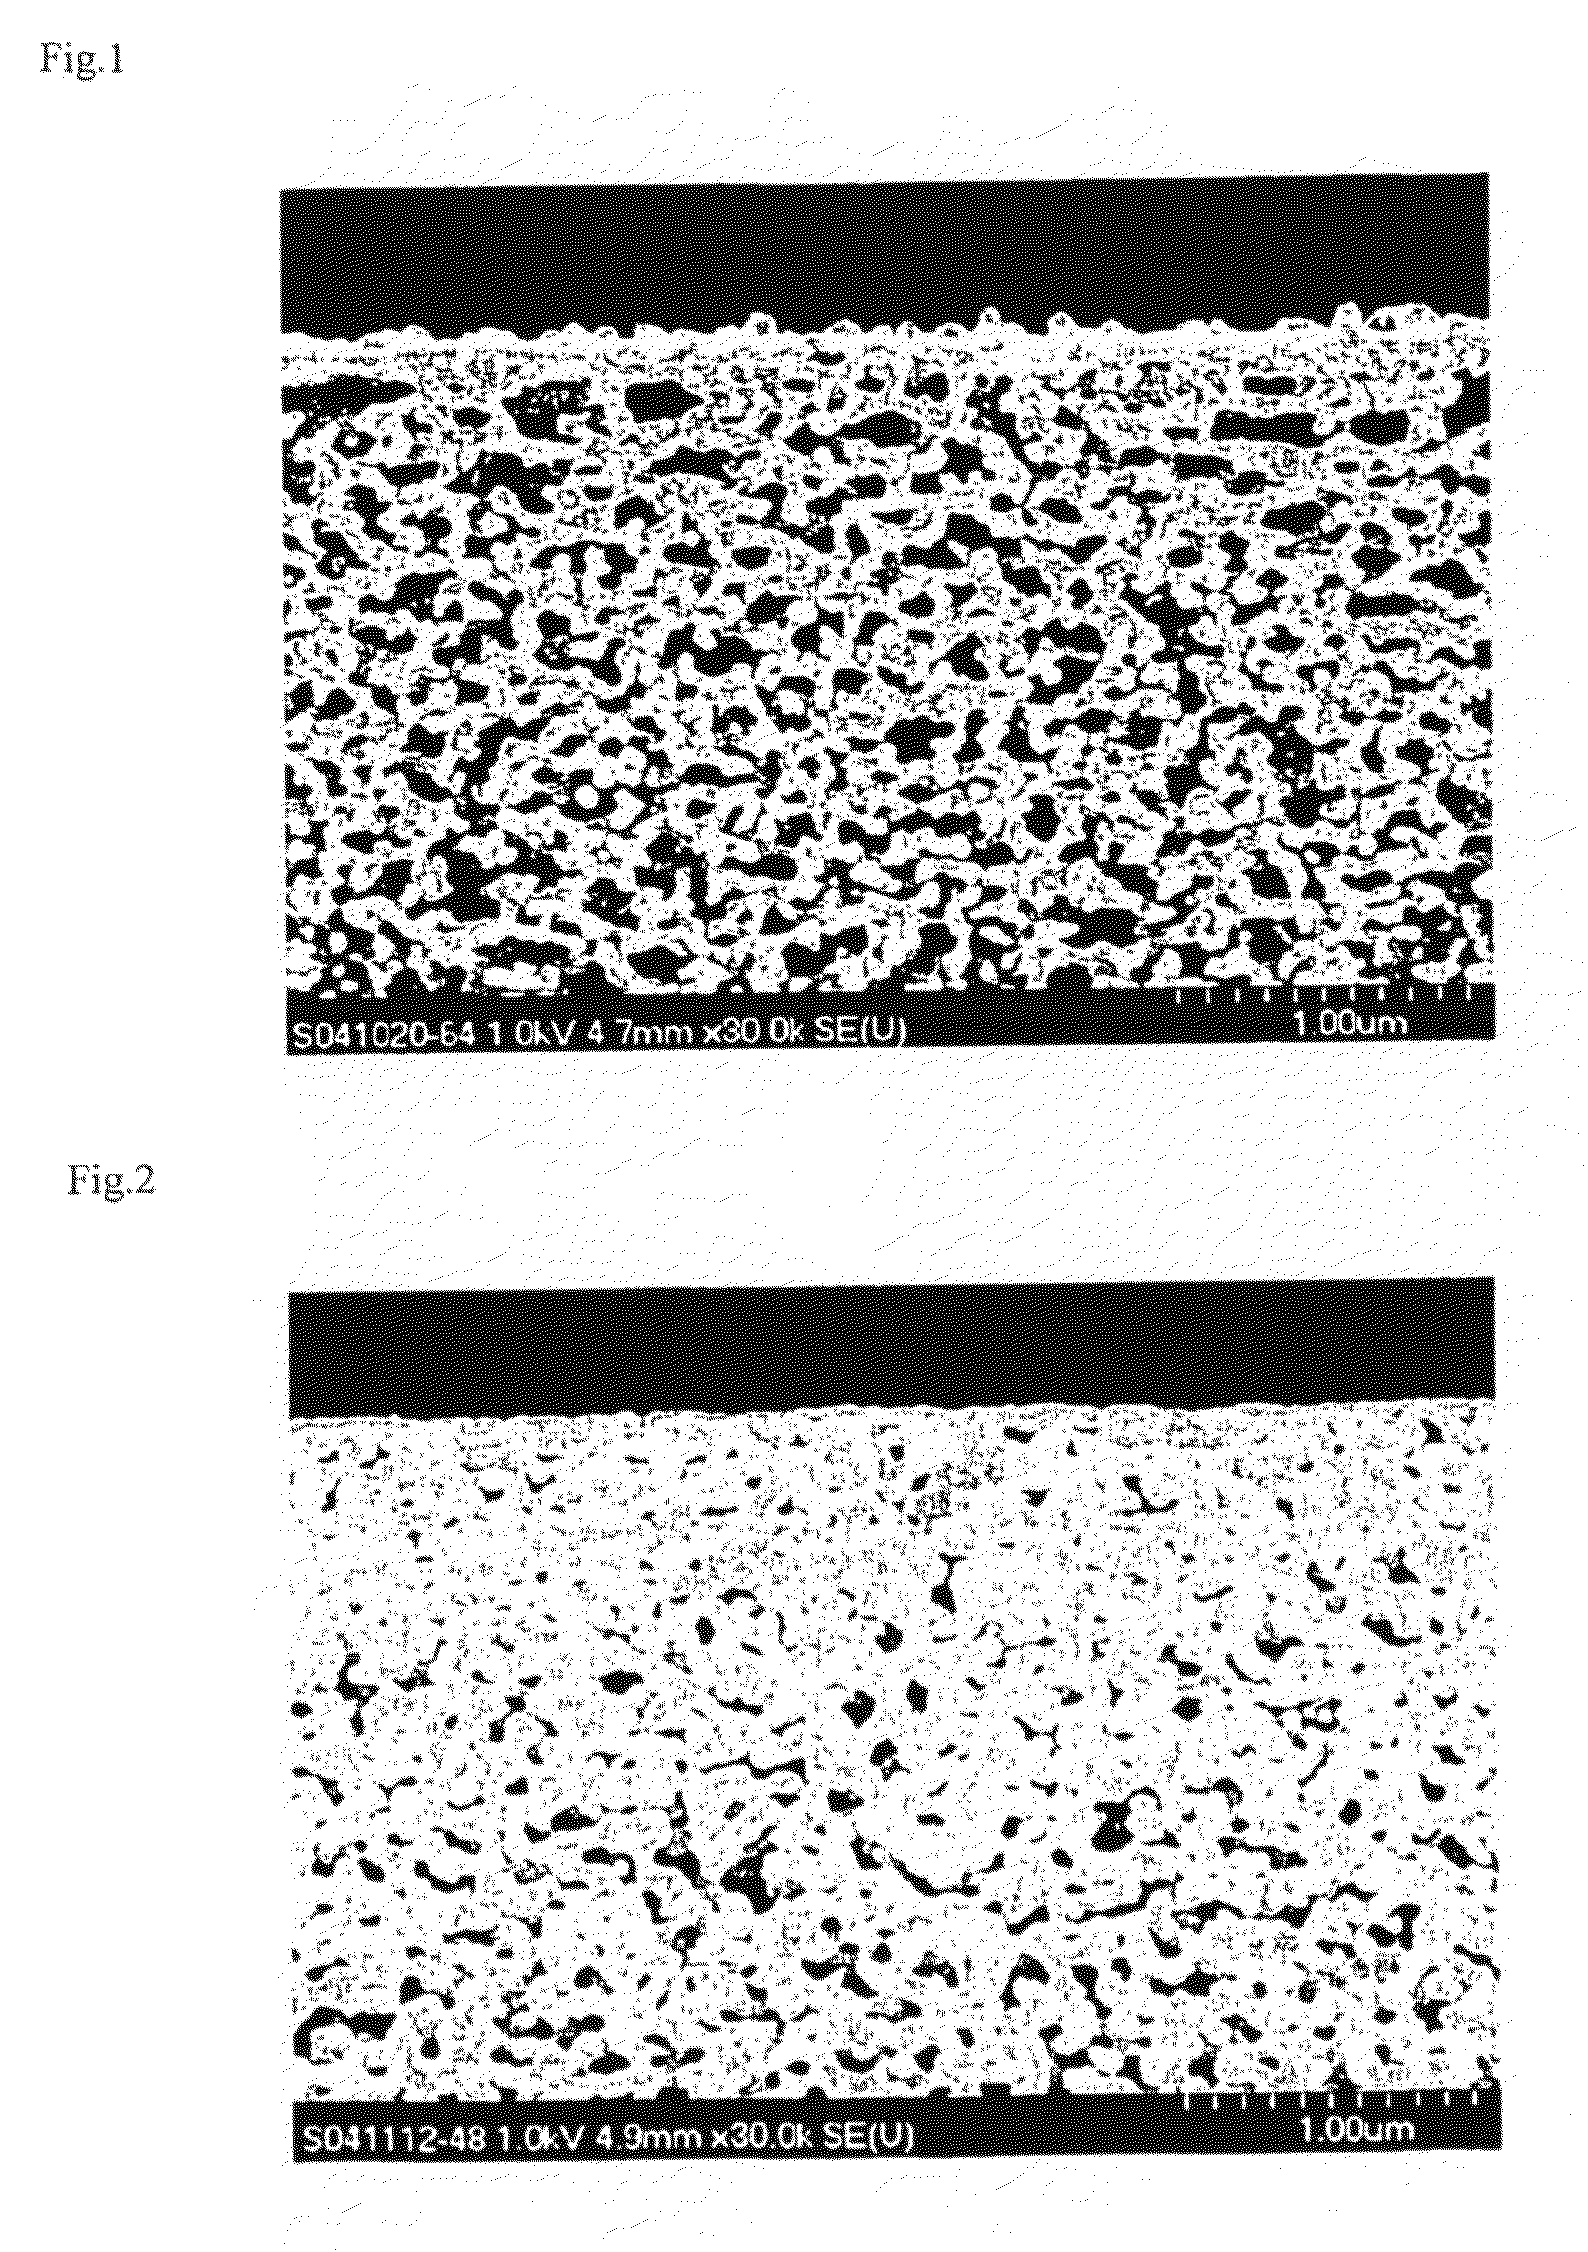 Separation Membrane for Use in Treatment of Liquid Comprising Aromatic Ether Polymer Hydrophilized with Hydrophilizing Agent